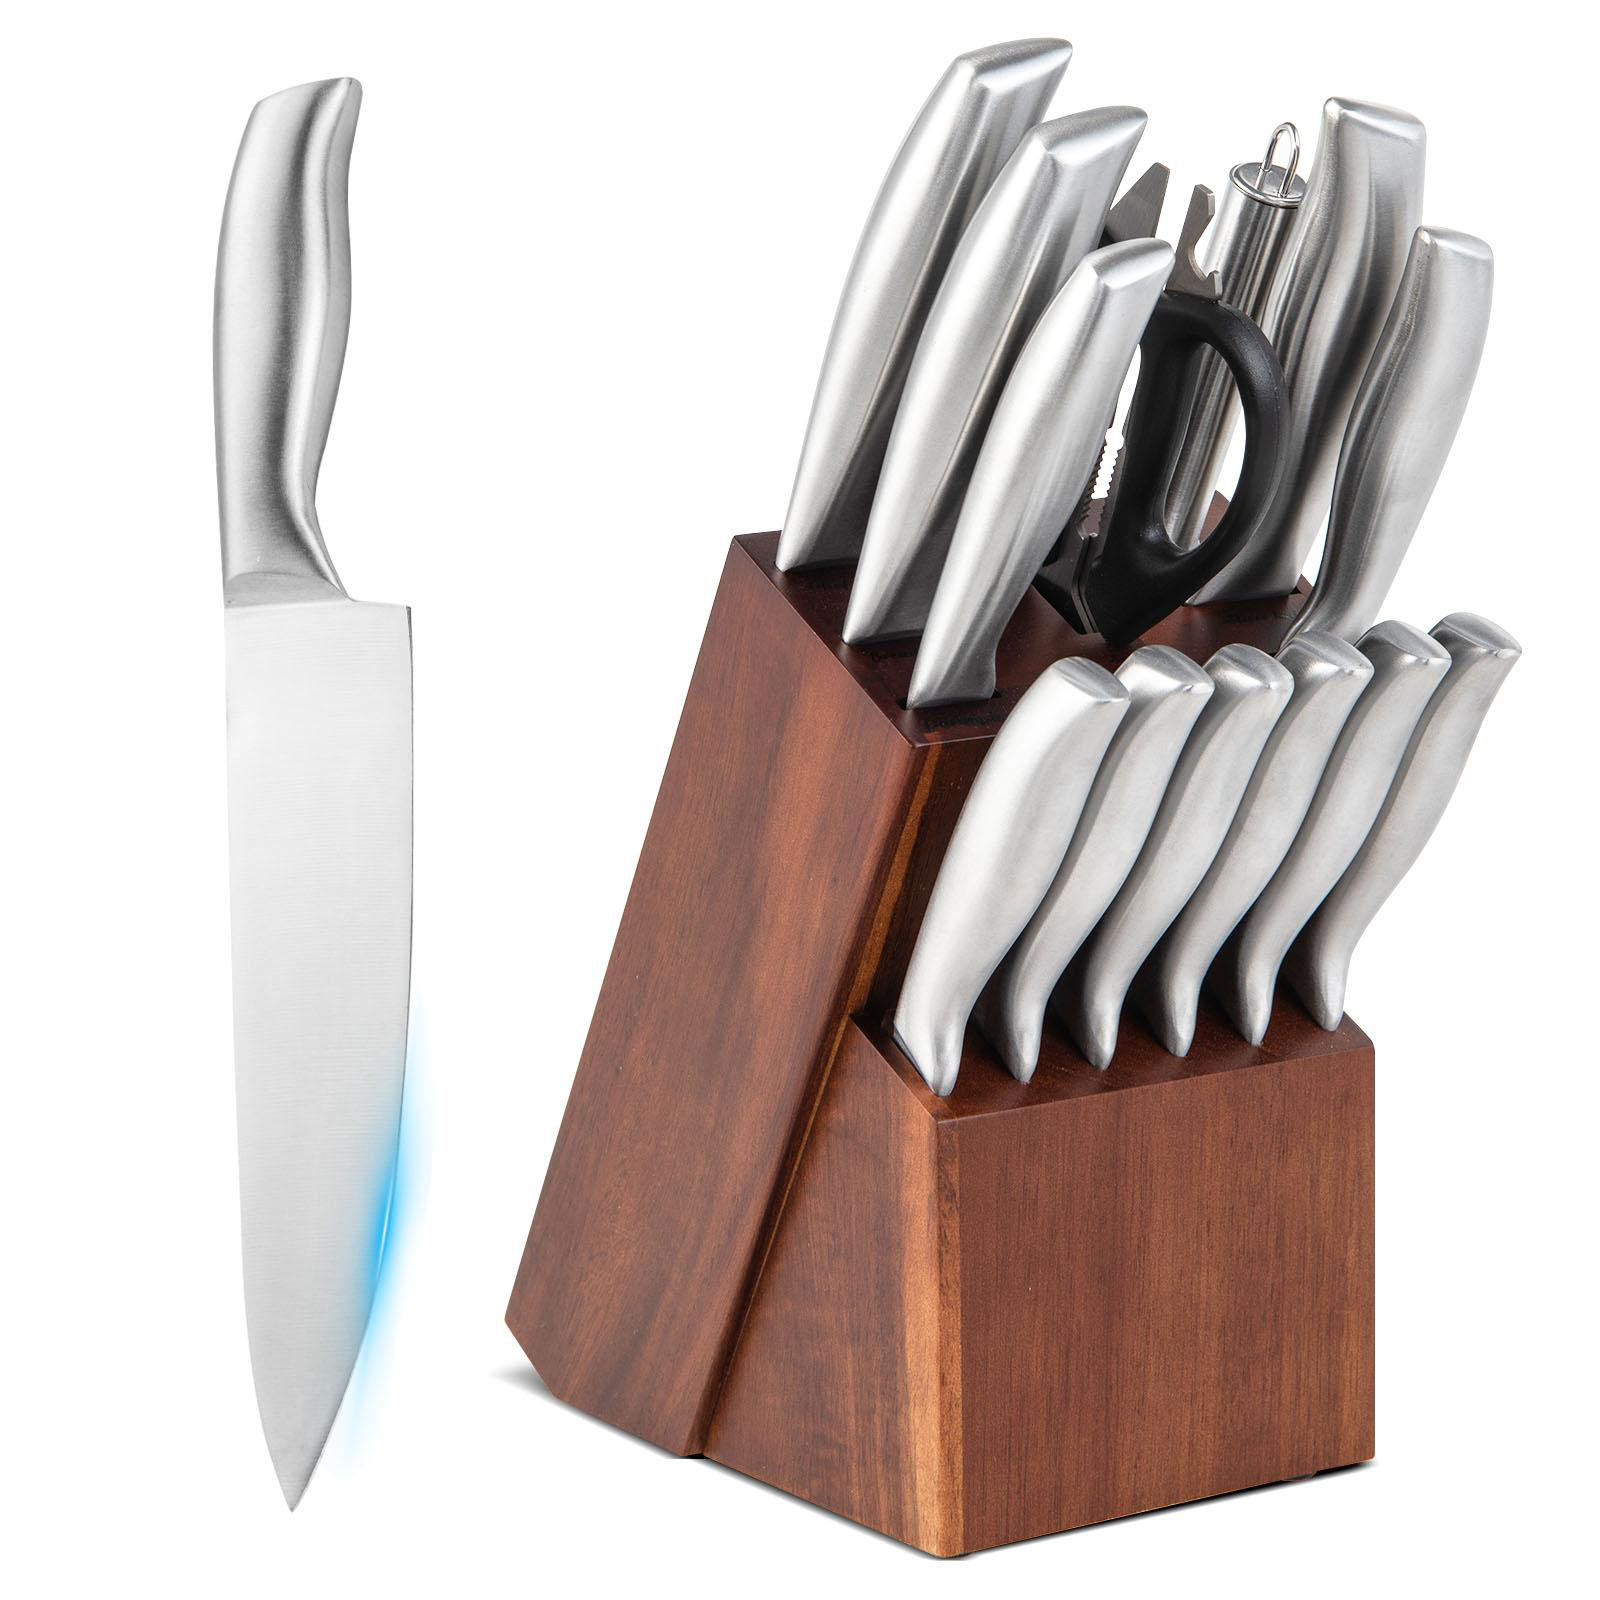 Giantex 5-Piece Kitchen Knife Set w/Block, Stainless Steel Knife Set  w/Hammered Design, All-in-One Knife Block Set w/Multipurpose Shears 